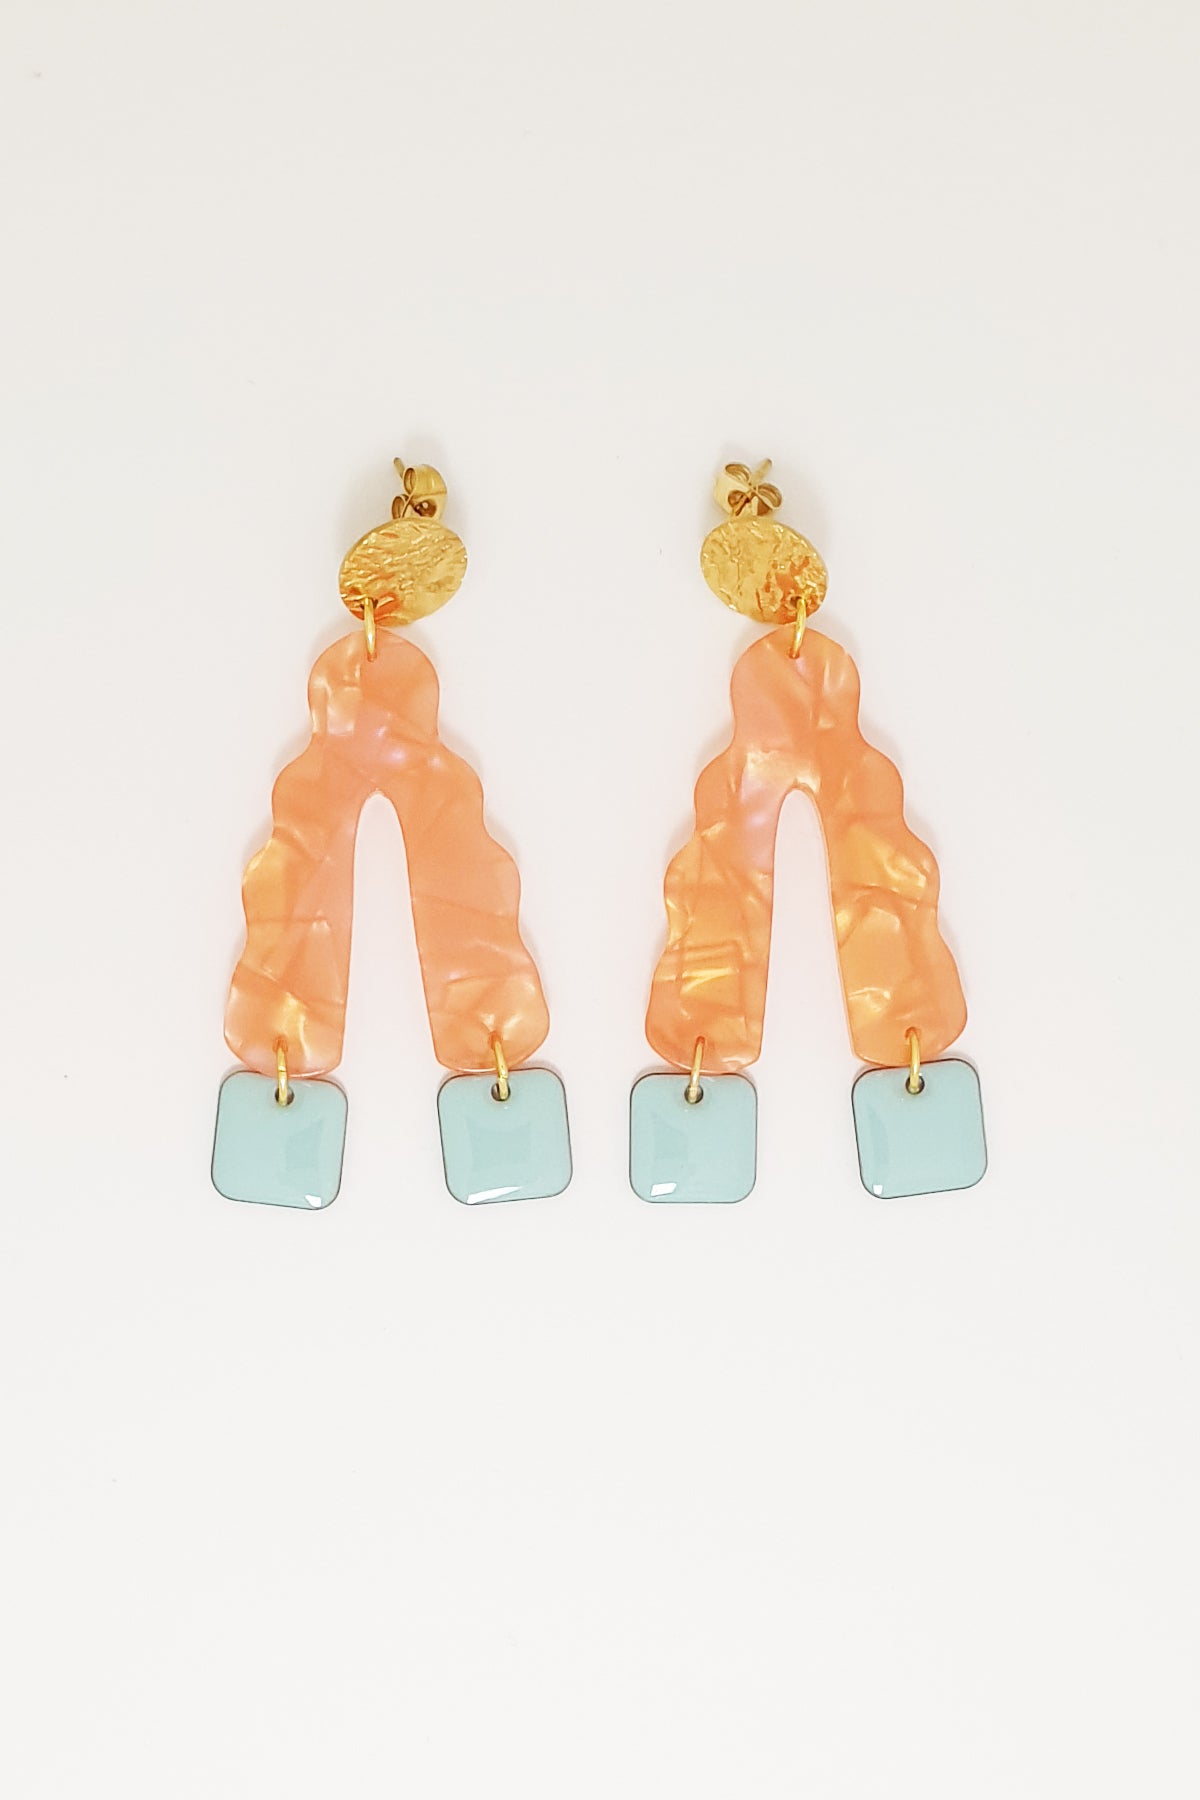 A pair of stud dangle earrings sit against a white background. They feature a textured circular gold stud top, an orange wavy upside down V-shaped acrylic, and honeydew blue square shaped enamel drops hanging from each end of the acrylic.